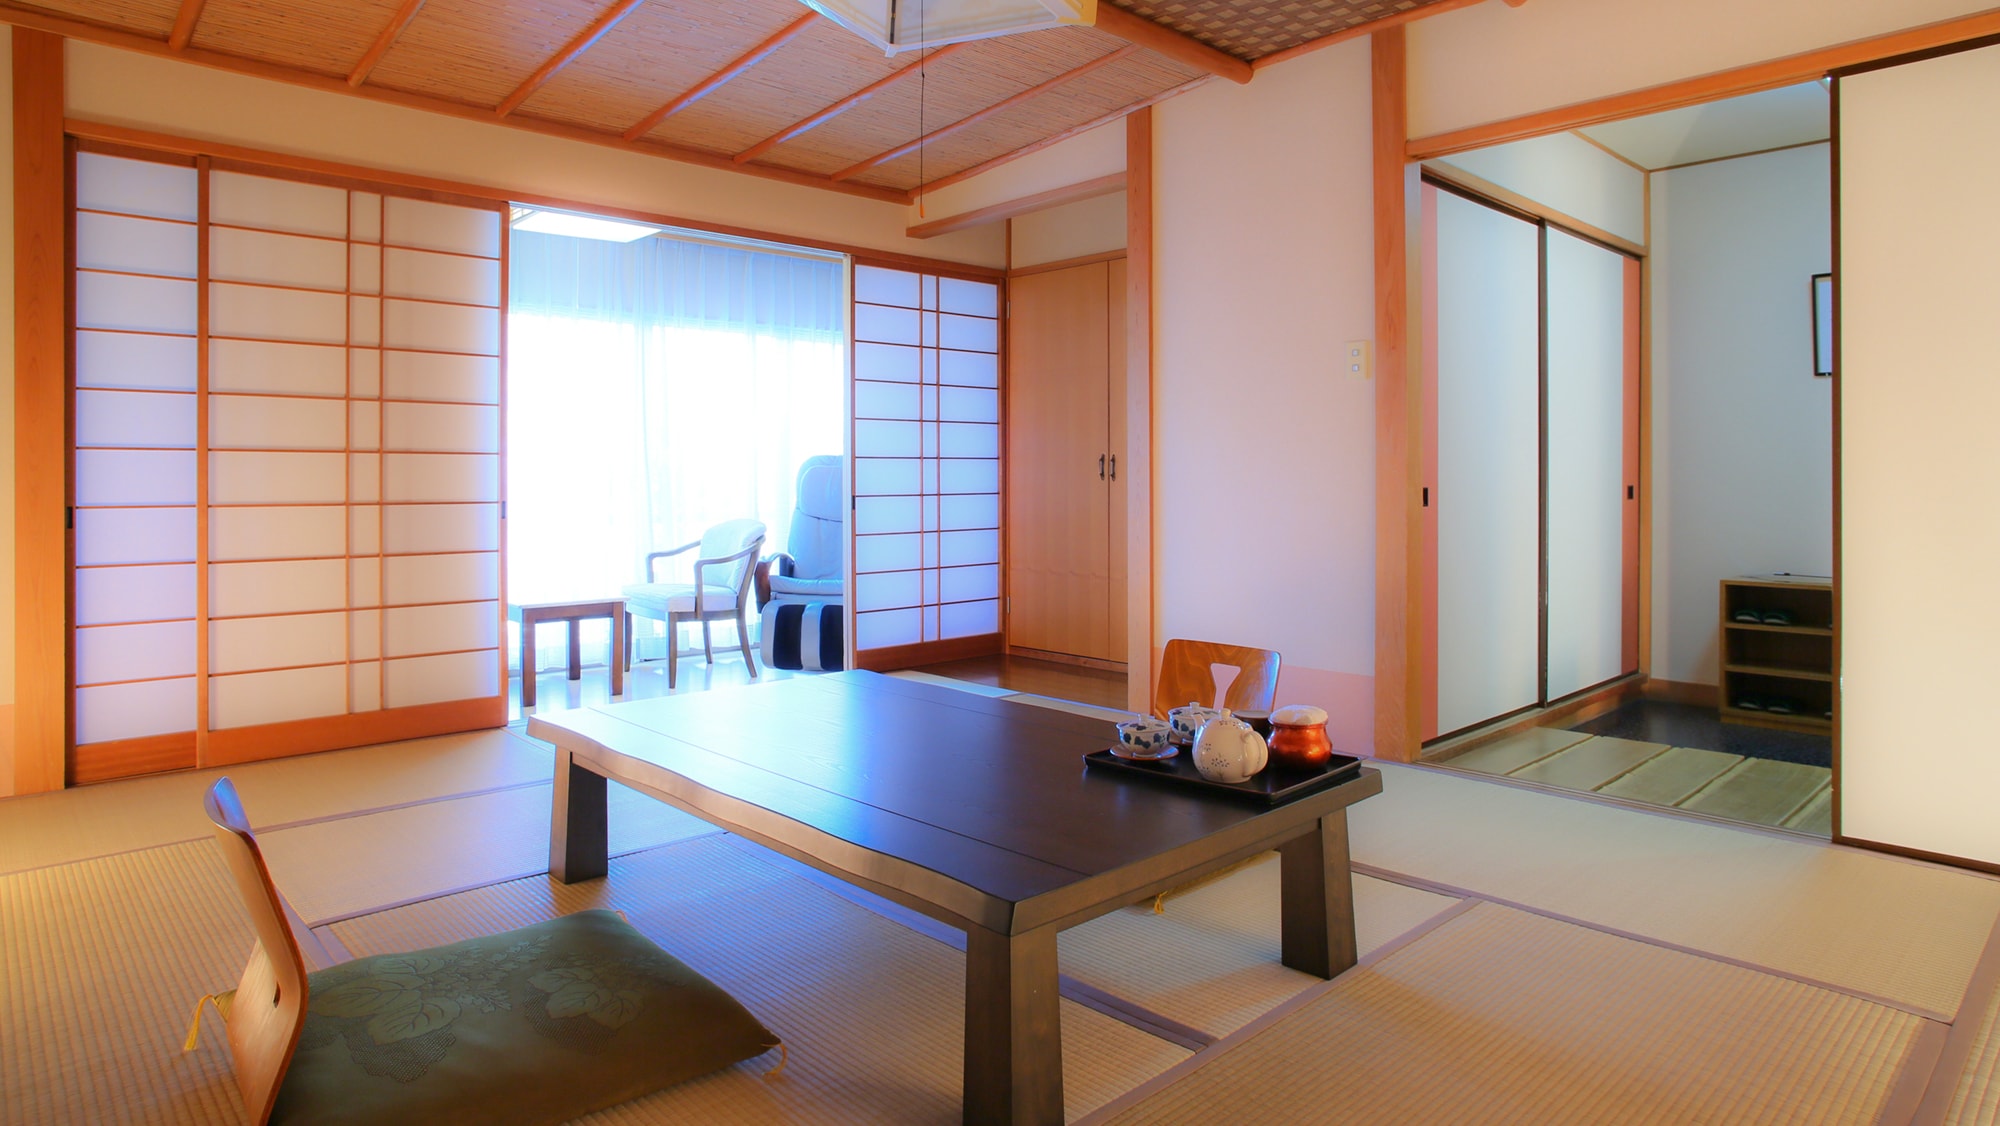 A room where you can enjoy the murmuring of Matsukawa and the greenery of the Otonashi Forest